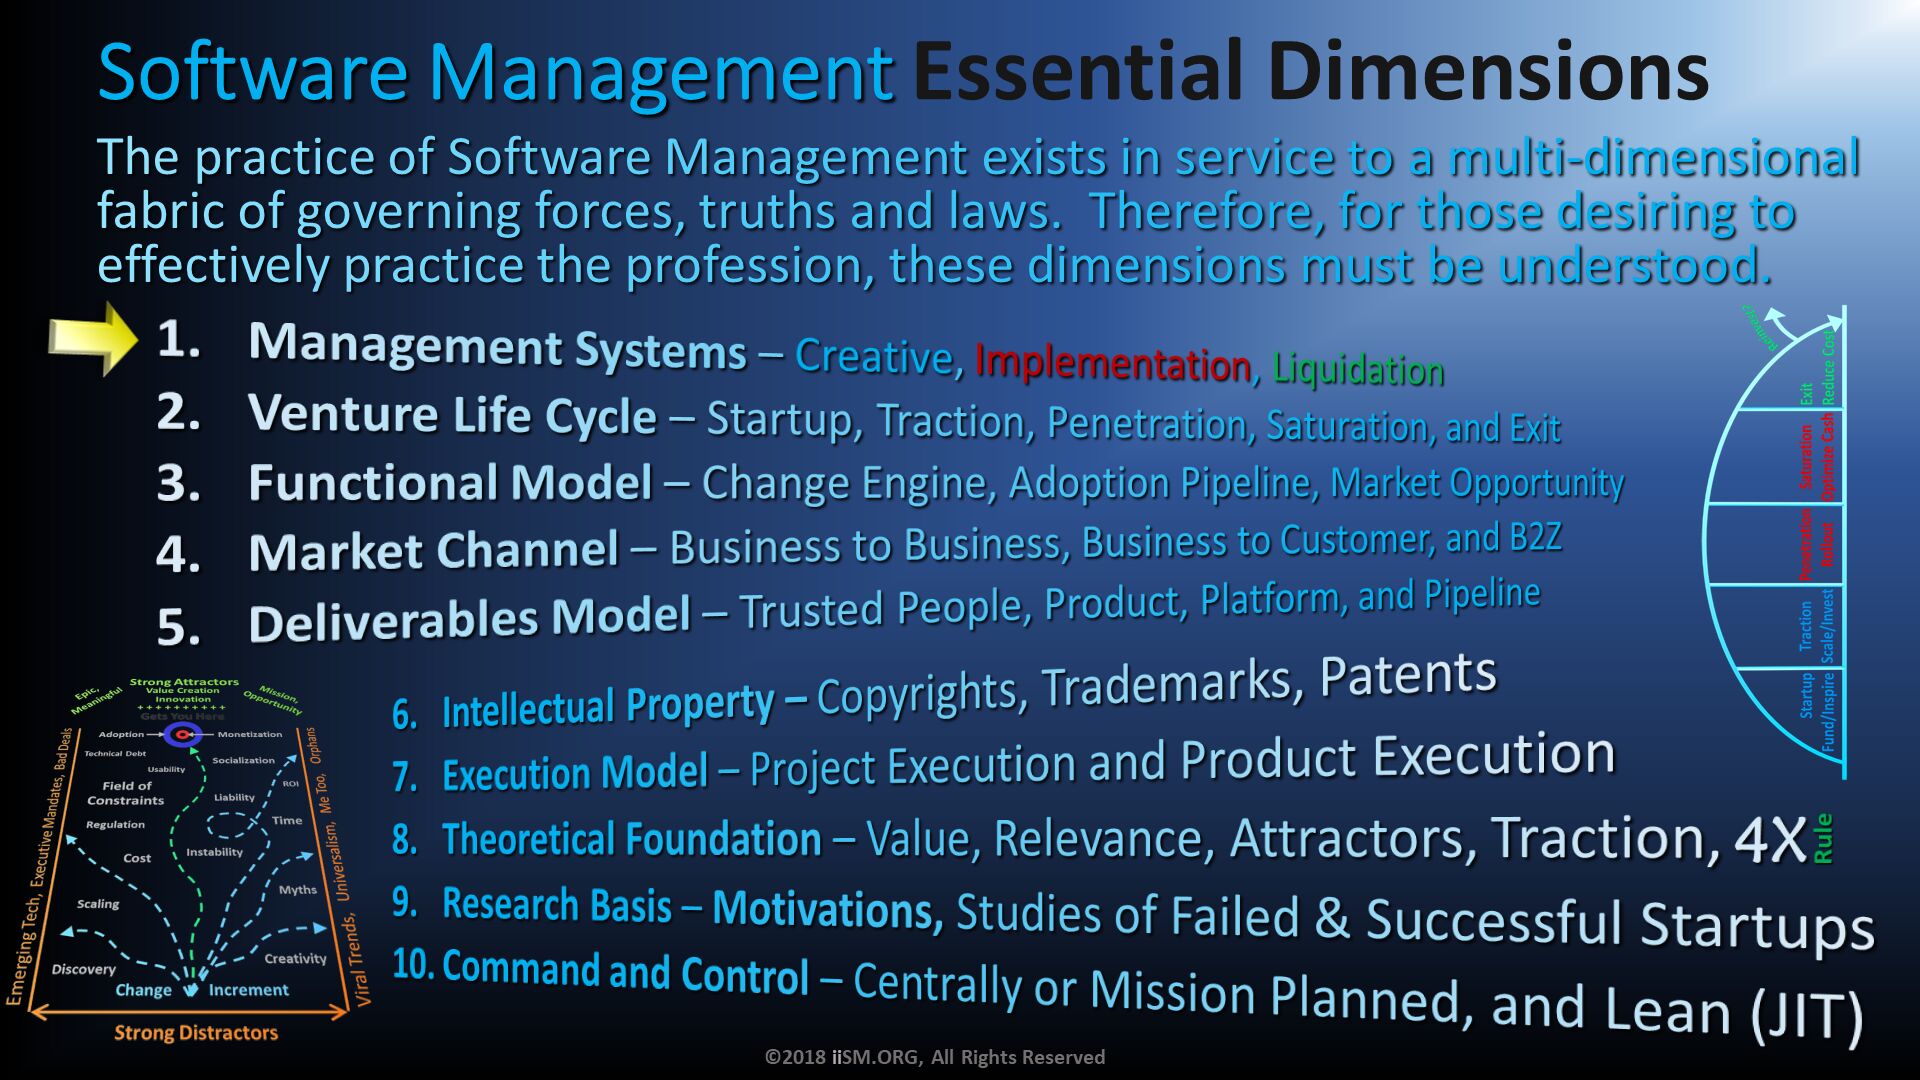 Software Management Essential Dimensions. Management Systems – Creative, Implementation, Liquidation
Venture Life Cycle – Startup, Traction, Penetration, Saturation, and Exit
Functional Model – Change Engine, Adoption Pipeline, Market Opportunity
Market Channel – Business to Business, Business to Customer, and B2Z
Deliverables Model – Trusted People, Product, Platform, and Pipeline . The practice of Software Management exists in service to a multi-dimensional fabric of governing forces, truths and laws.  Therefore, for those desiring to effectively practice the profession, these dimensions must be understood. . Intellectual Property – Copyrights, Trademarks, Patents 
Execution Model – Project Execution and Product Execution
Theoretical Foundation – Value, Relevance, Attractors, Traction, 
Research Basis – Motivations, Studies of Failed & Successful Startups
Command and Control – Centrally or Mission Planned, and Lean (JIT). ©2018 iiSM.ORG, All Rights Reserved. 